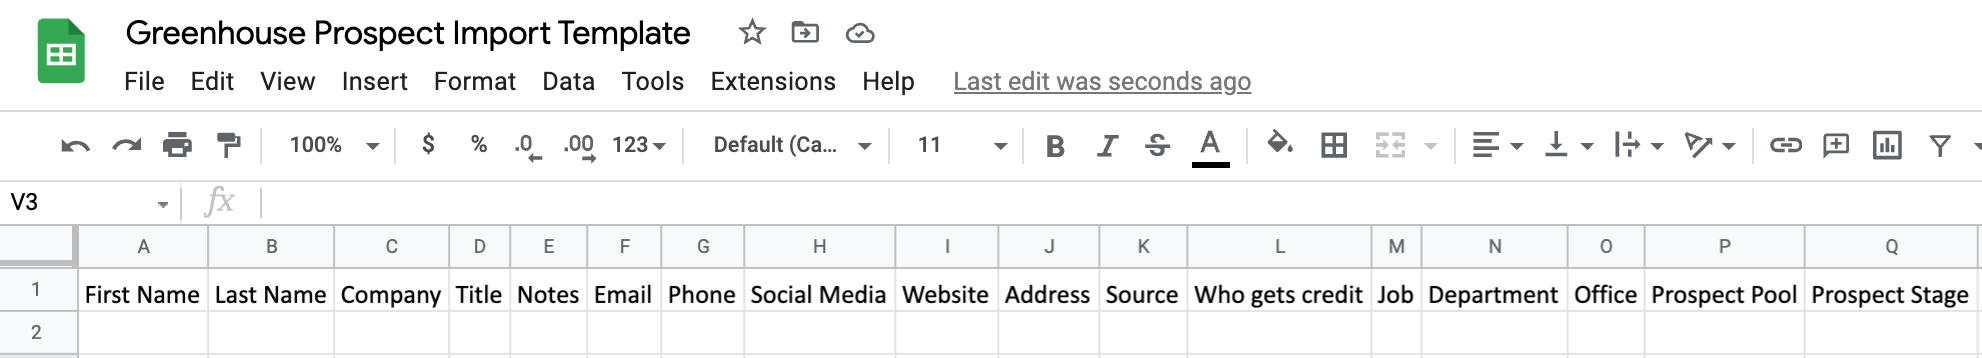 Greenhouse_Prospect_Import_Template_-_Google_Sheets.png